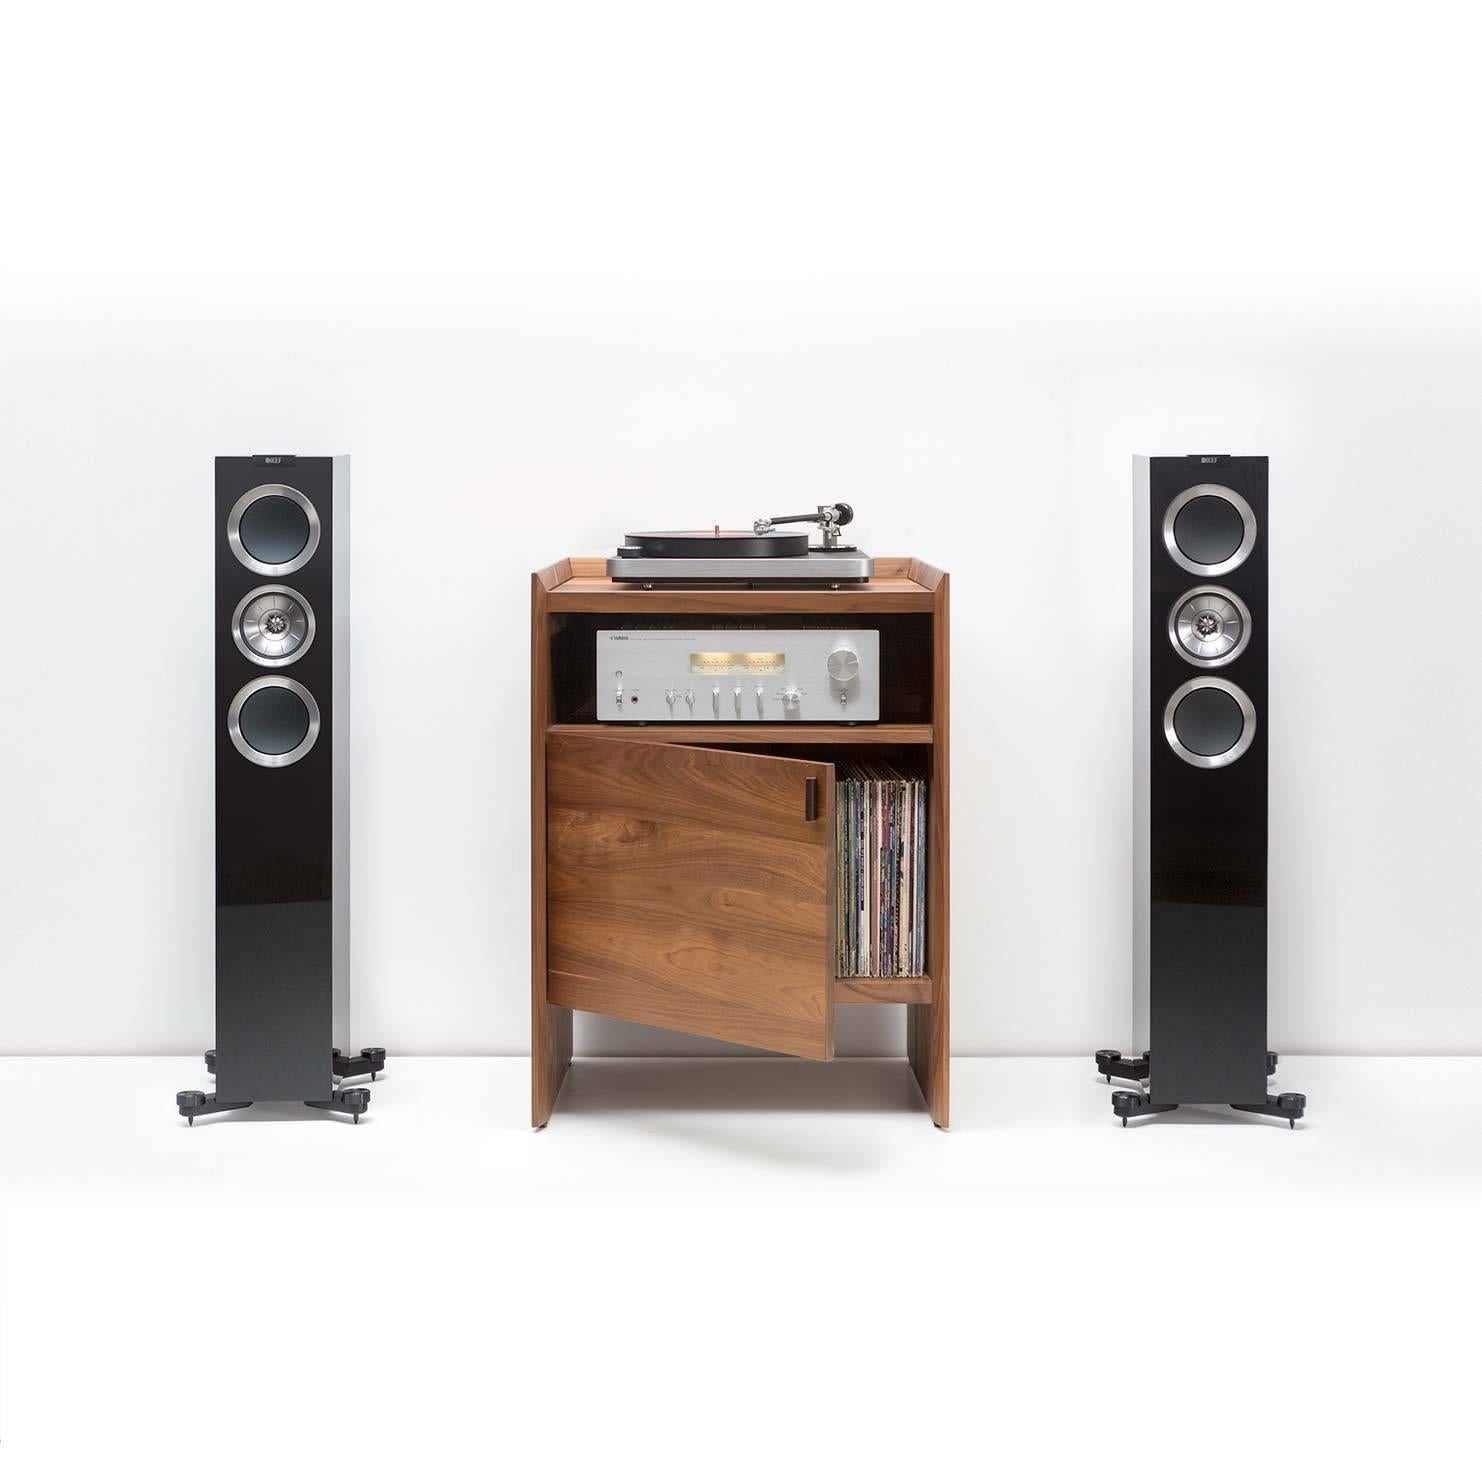 An all-in-one solution, Unison combines both audio gear and record storage into a beautifully designed single piece of solid wood furniture. When flanked with floor standing speakers Unison creates the ultimate dedicated entertainment furniture